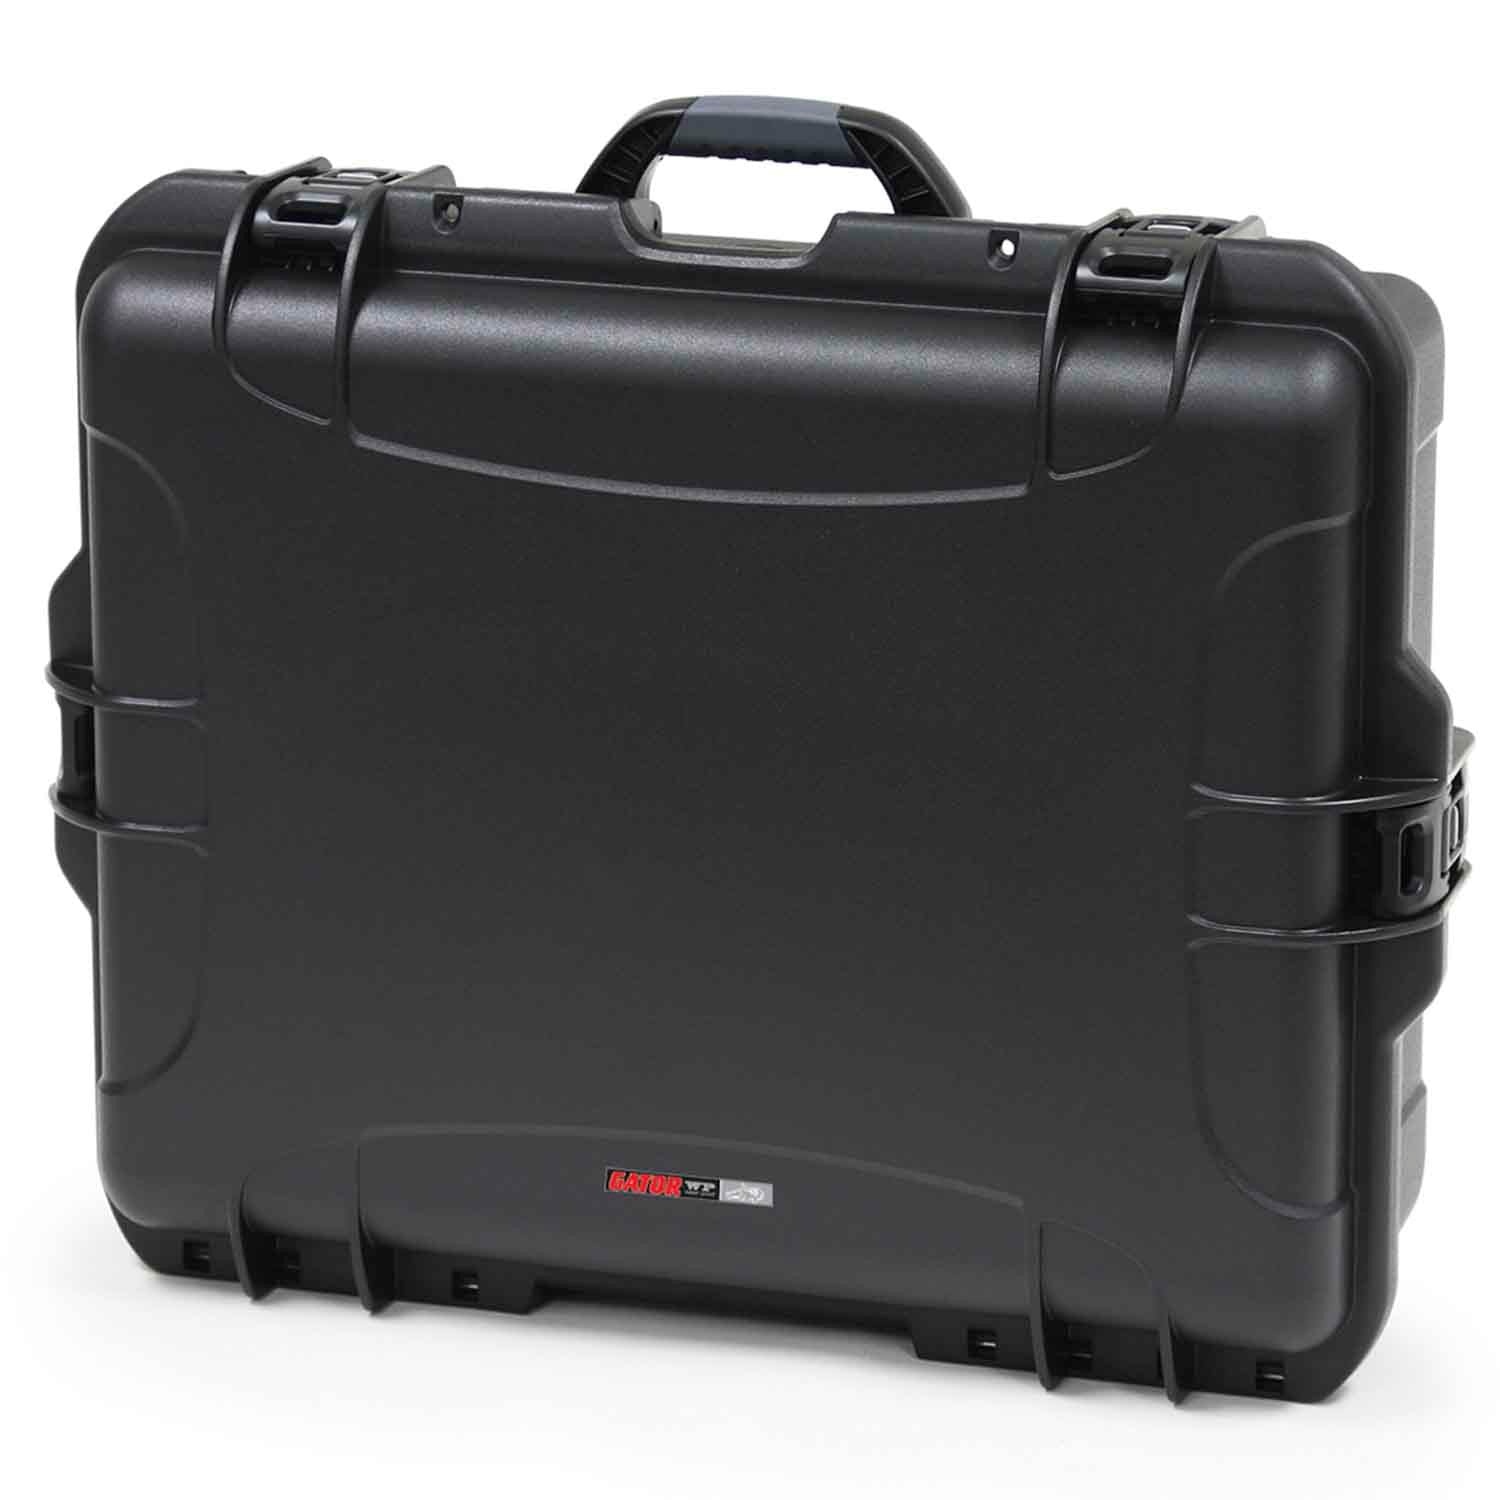 Gator Cases GU-2217-08-WPDF Waterproof Injection Molded Case with Diced Foam - 22" x 17" x 8.2" - Hollywood DJ